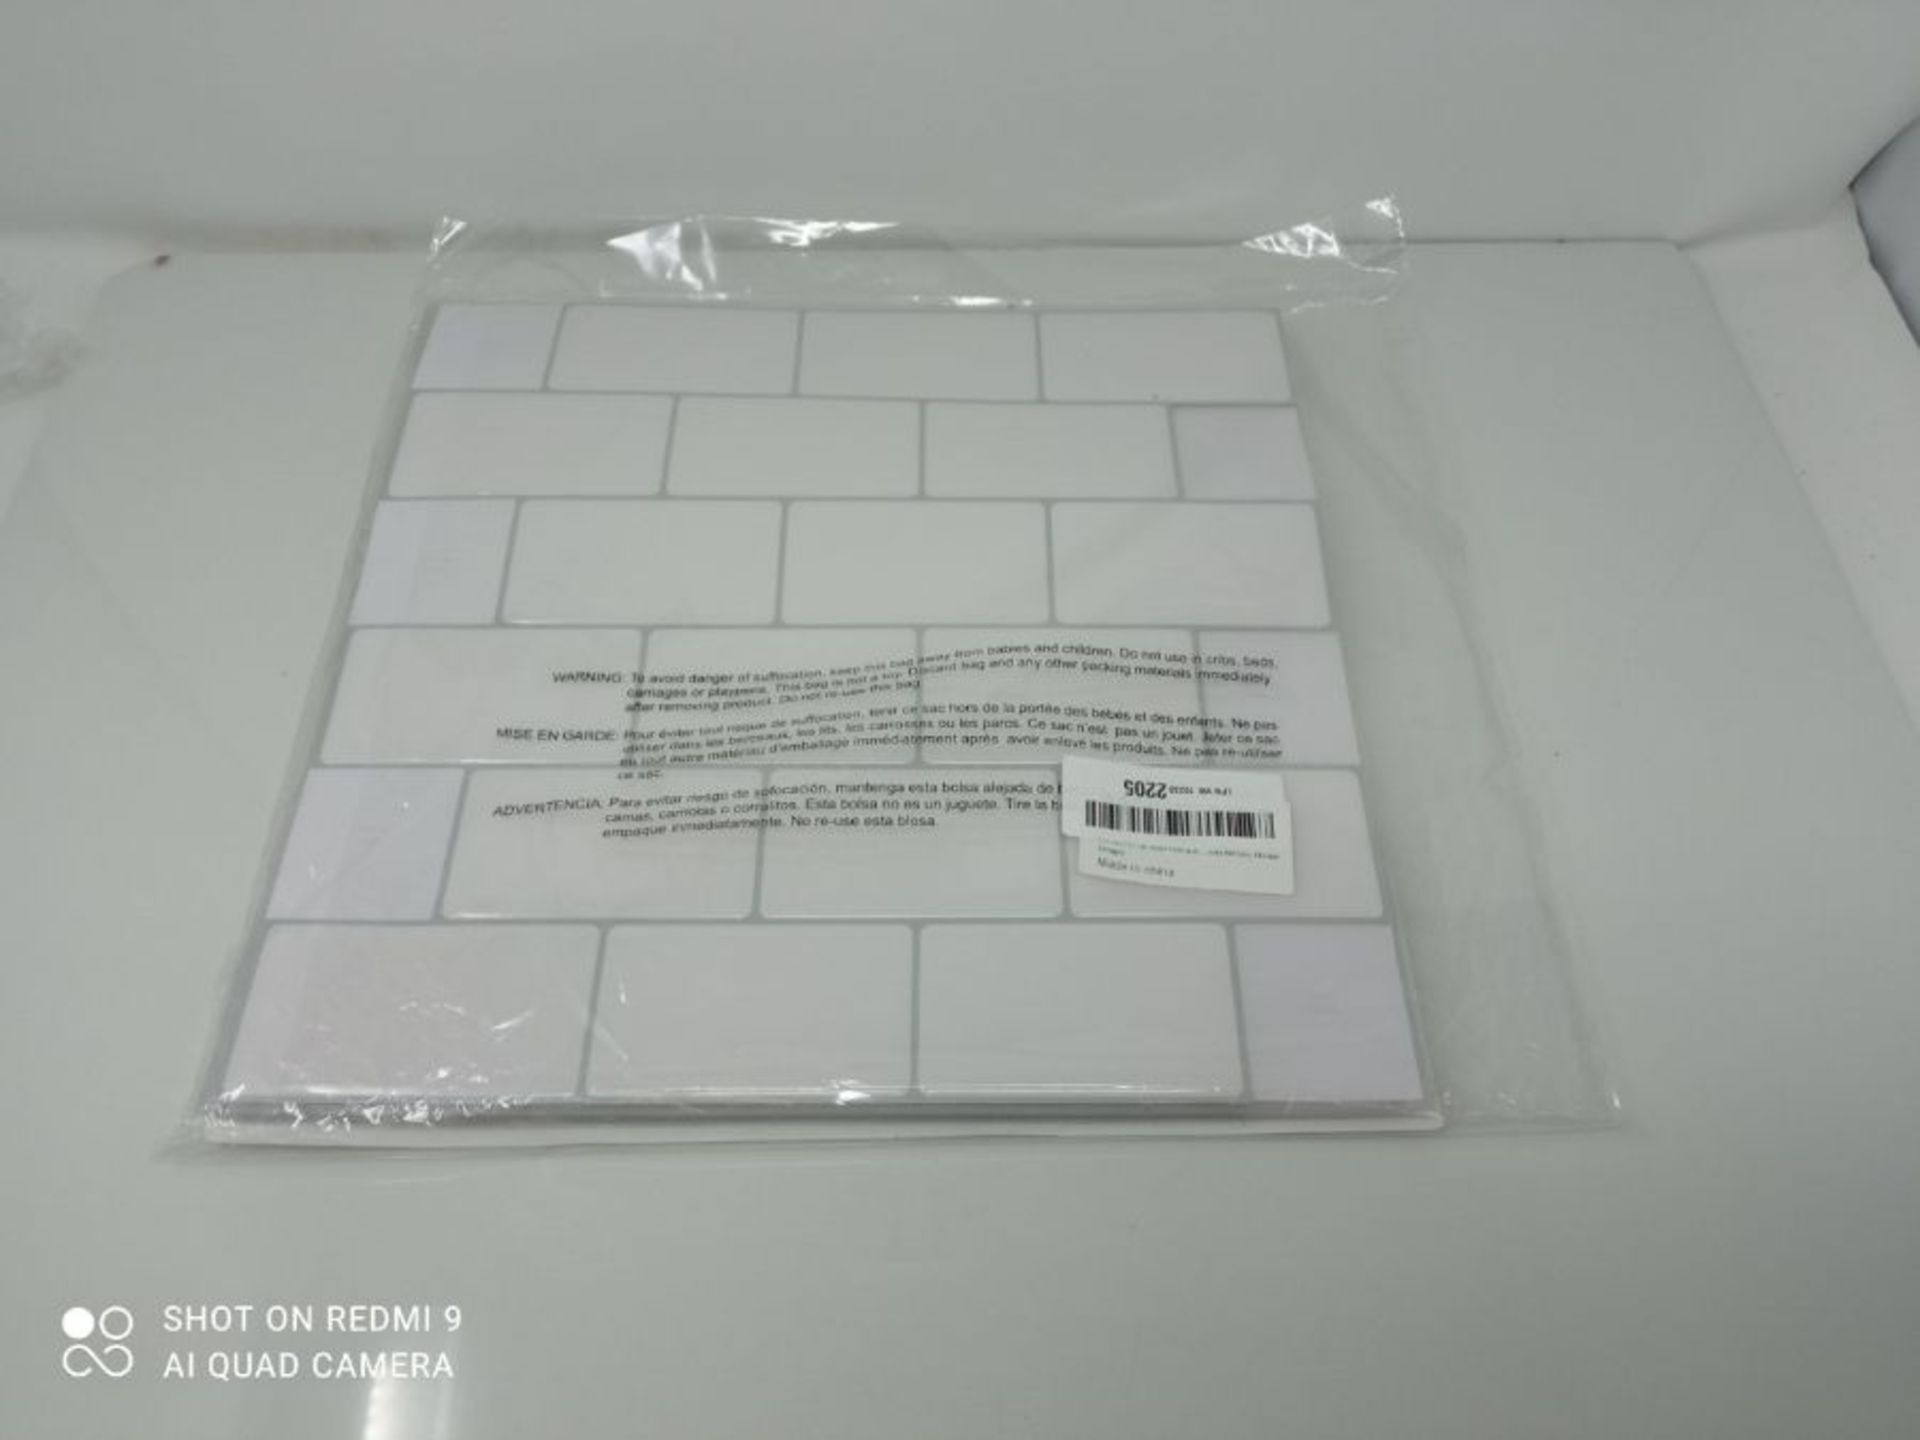 STICKGOO 10-Sheet Peel and Stick Subway Tile Stickers, 12"x12" Self Adhesive Wall Tile - Image 2 of 3